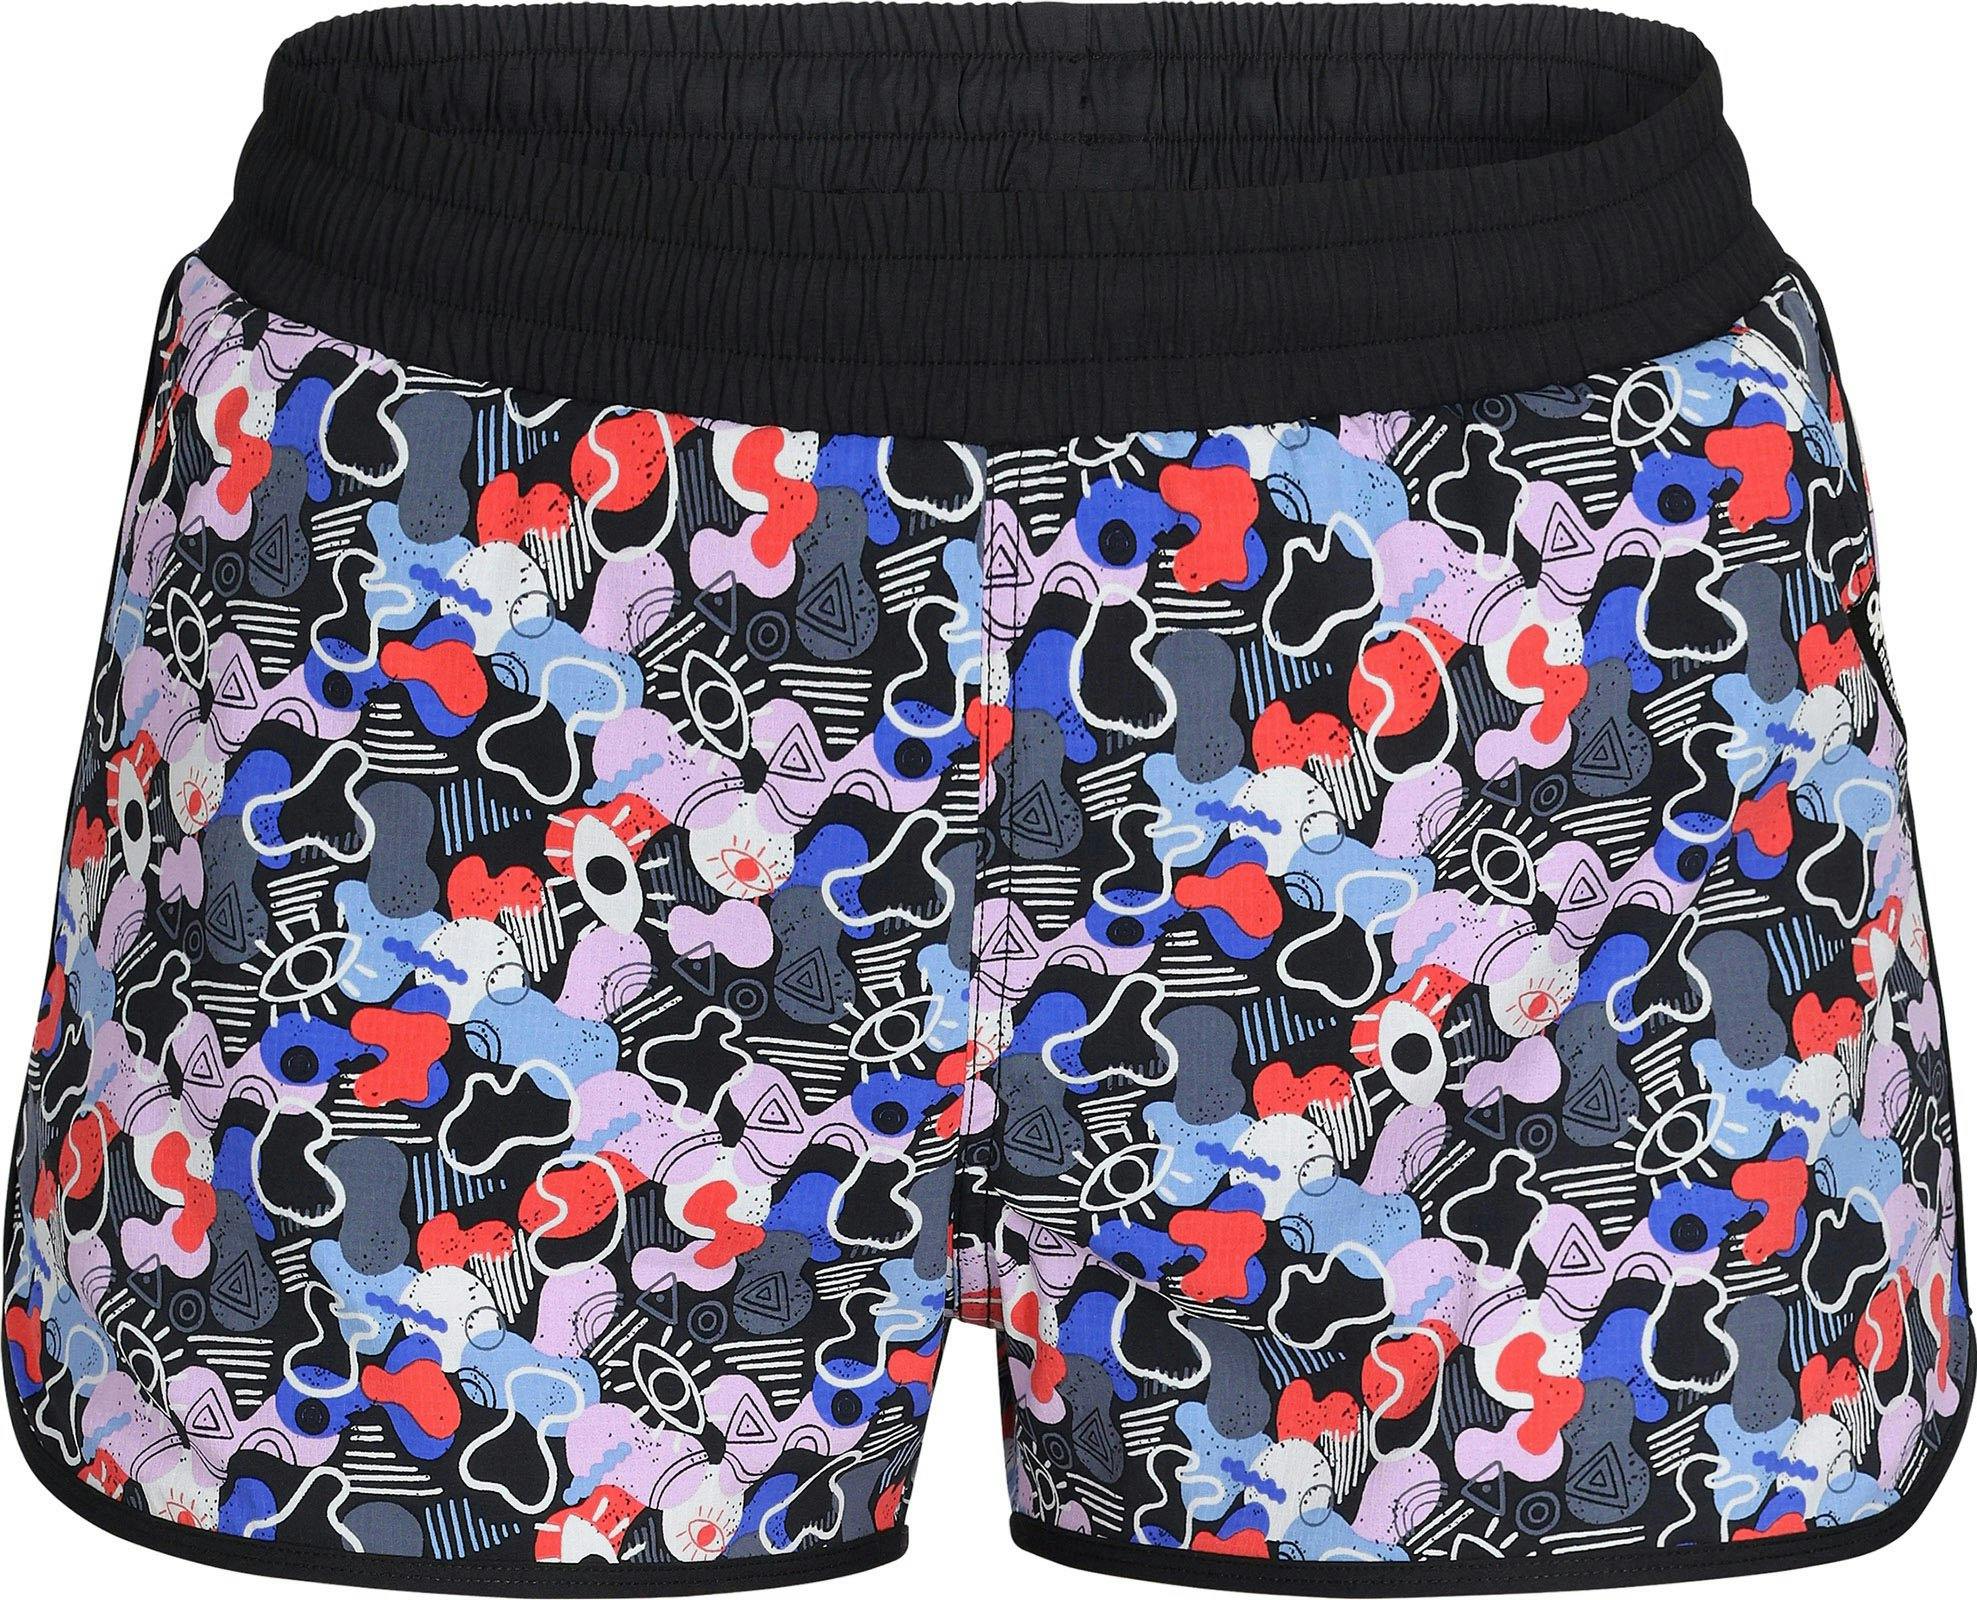 Product image for Zendo Printed Multi Shorts - Women's